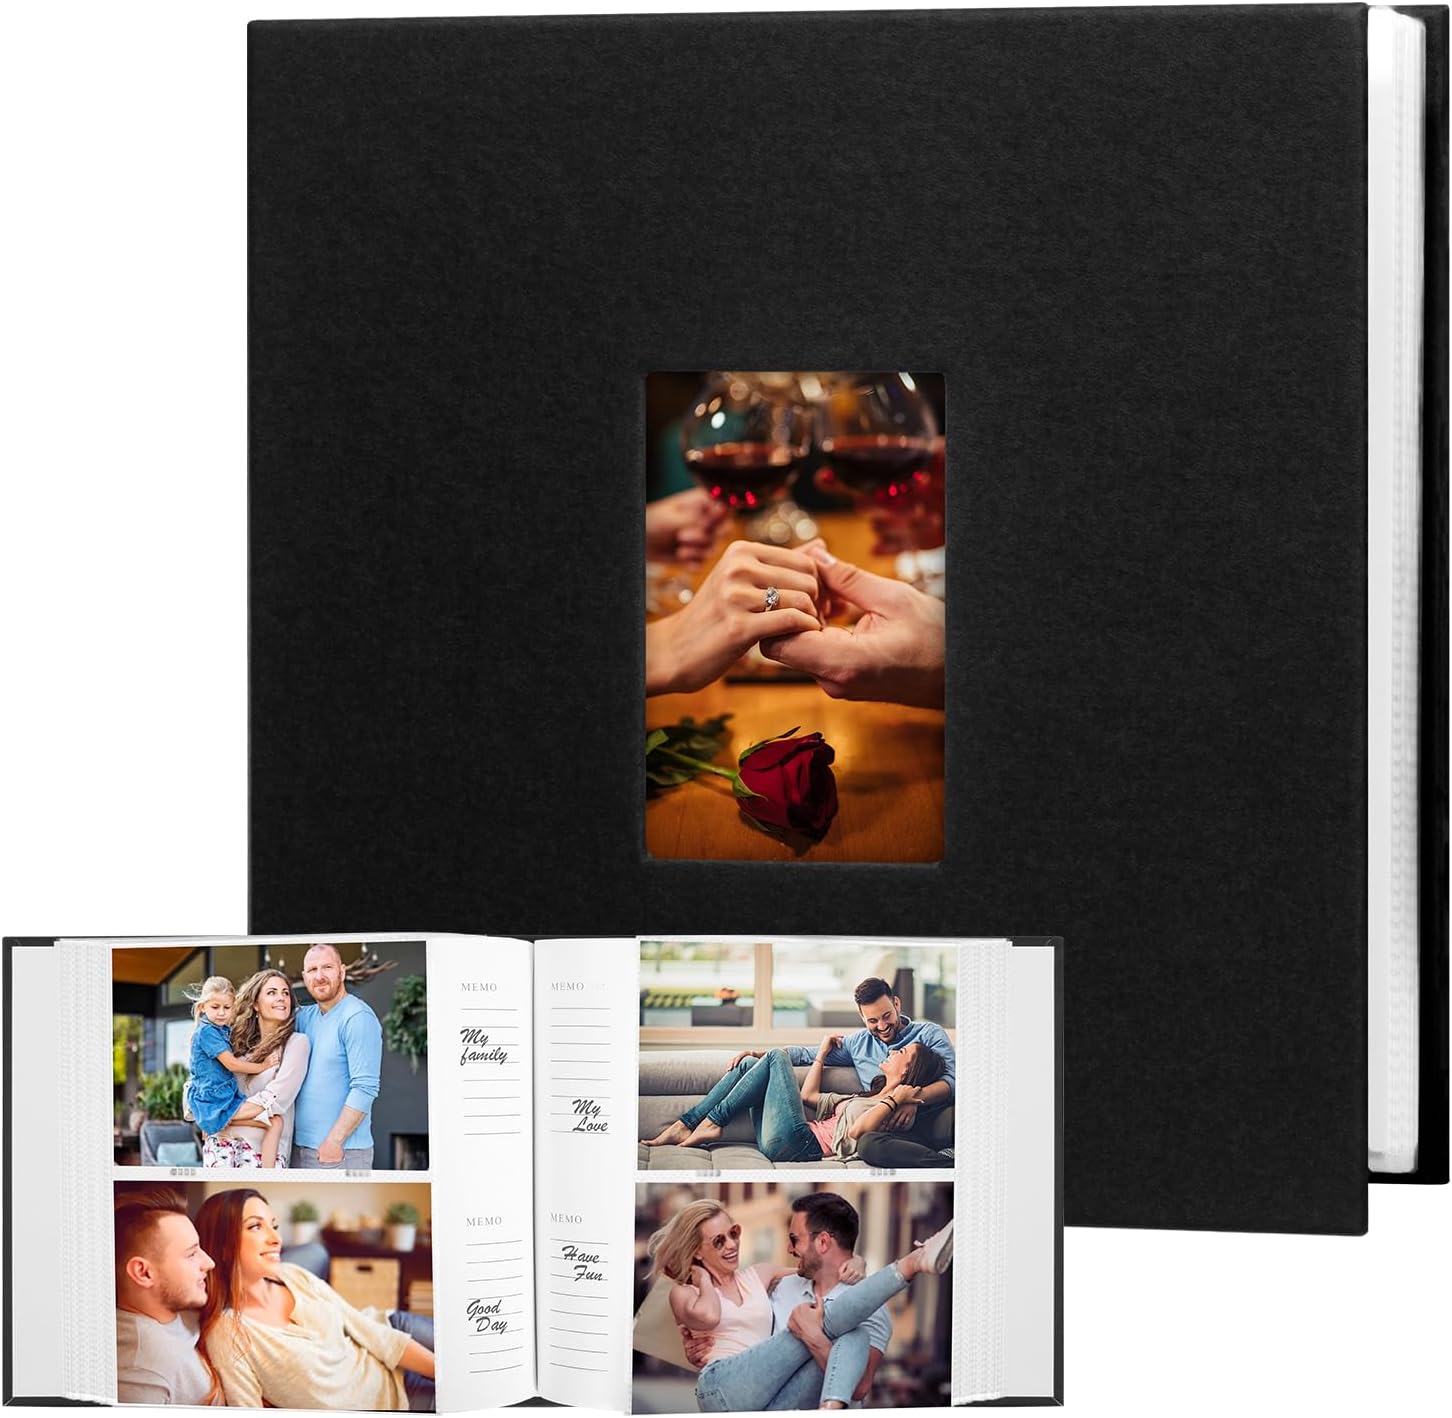 Yeaqee 20 Packs Photo Album 4x6 Small ​Picture Album Linen Cover